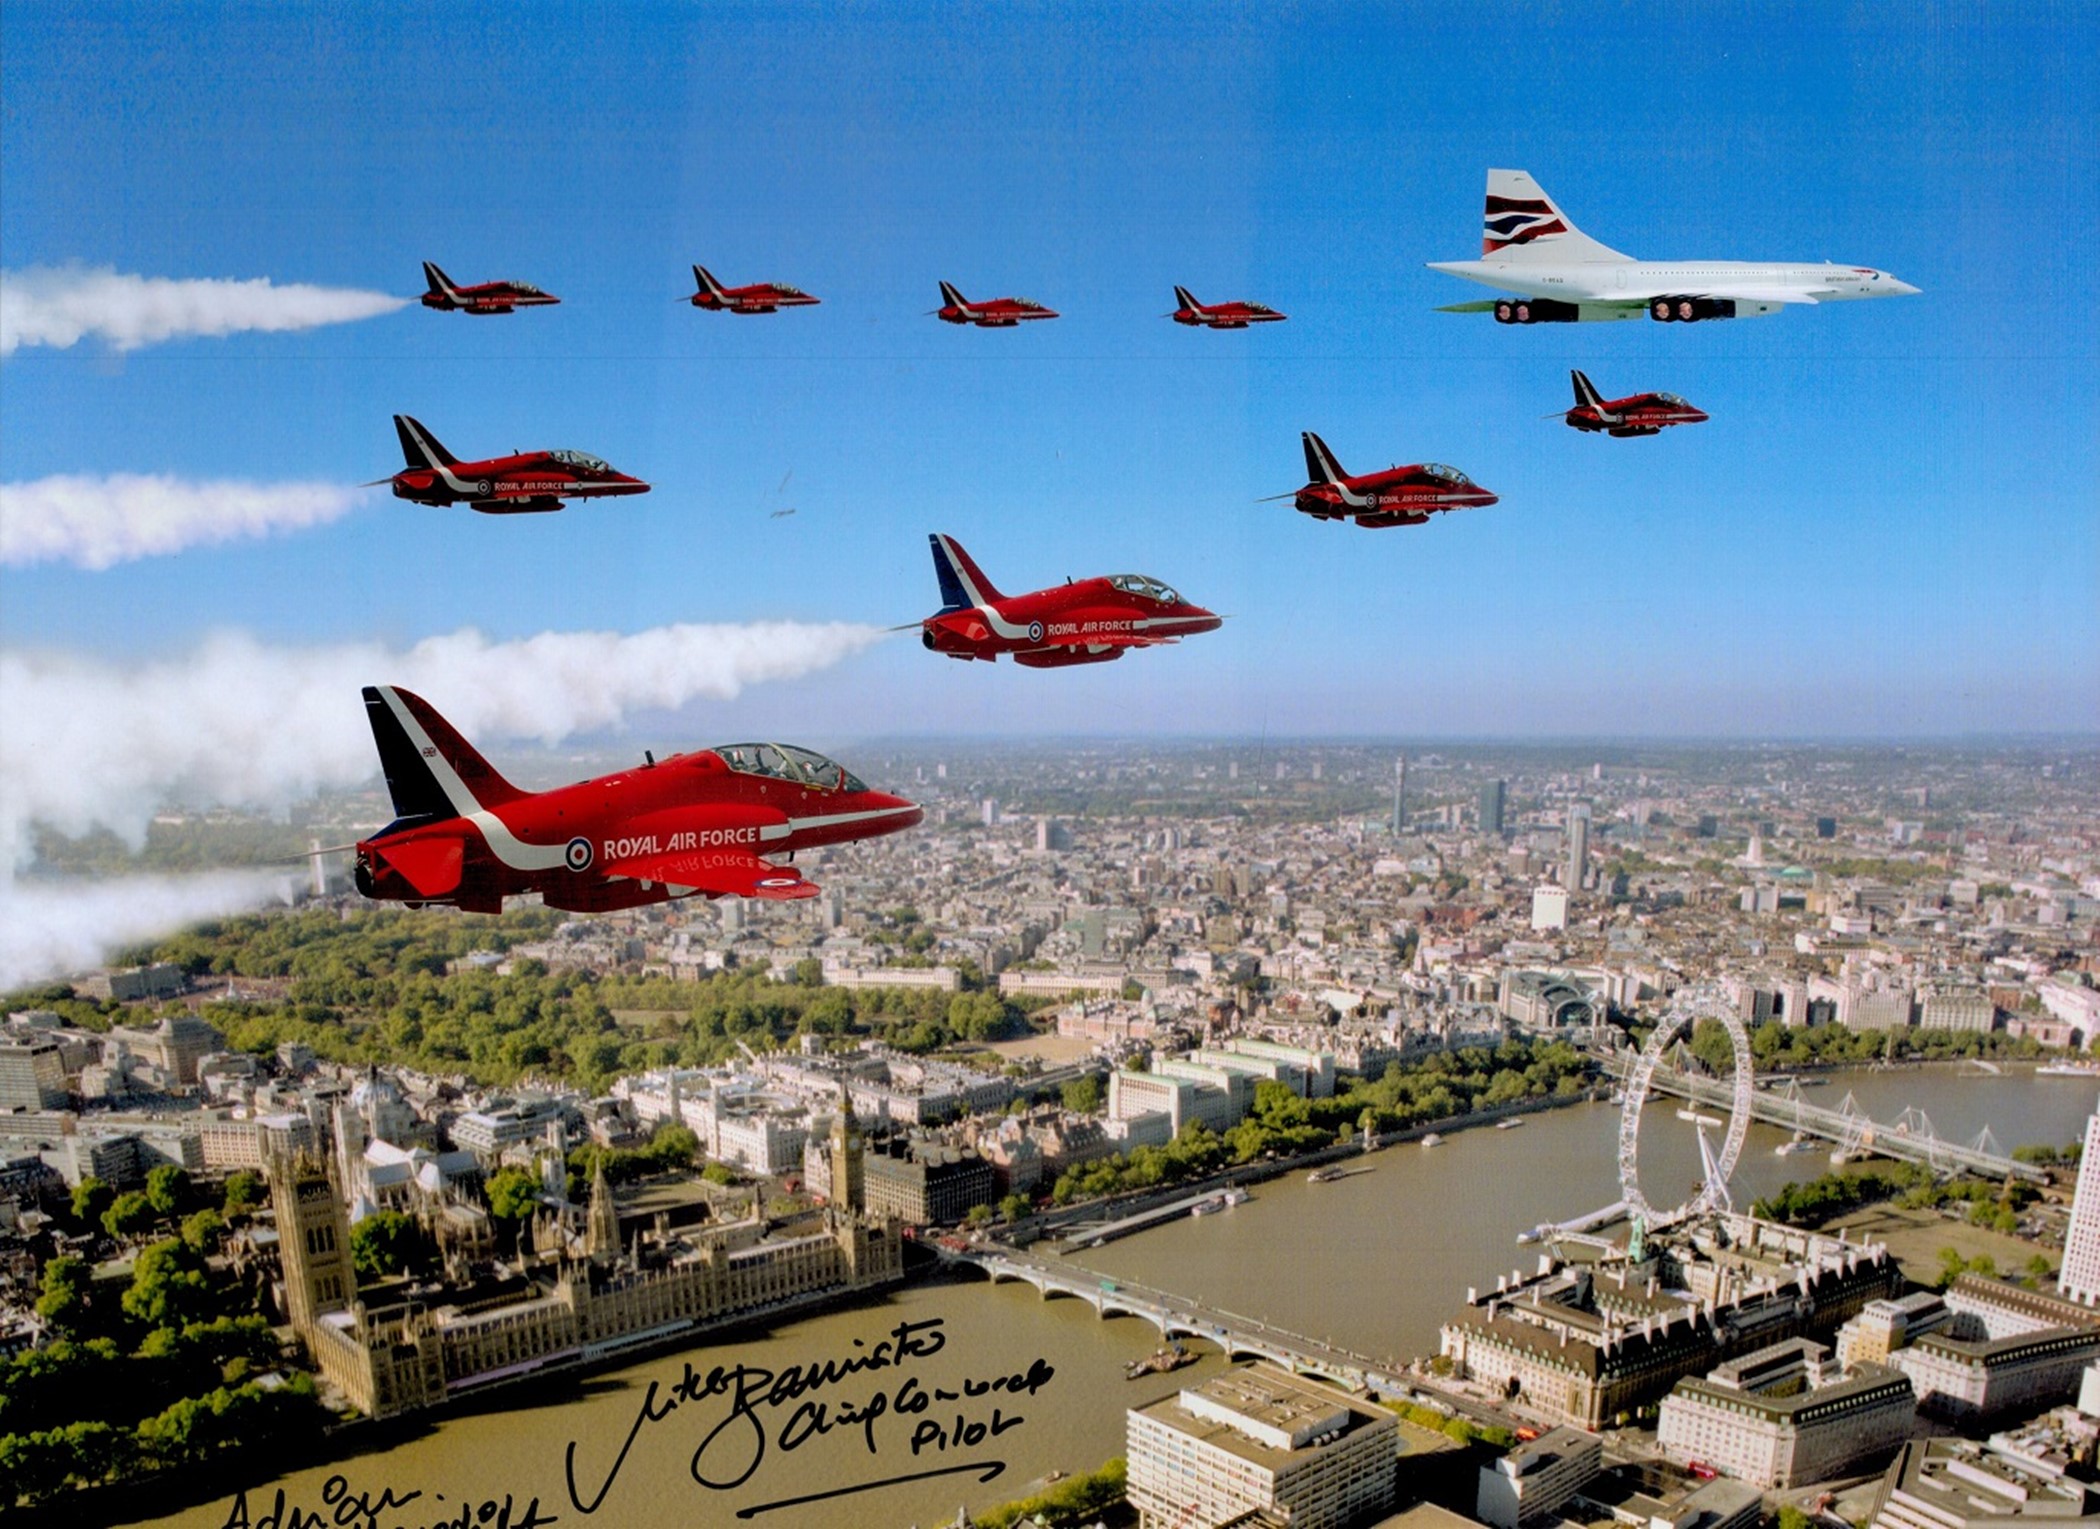 Concorde and Red Arrows Chief Pilot Capt Mike Banister and photographer Adrian Meredith signed